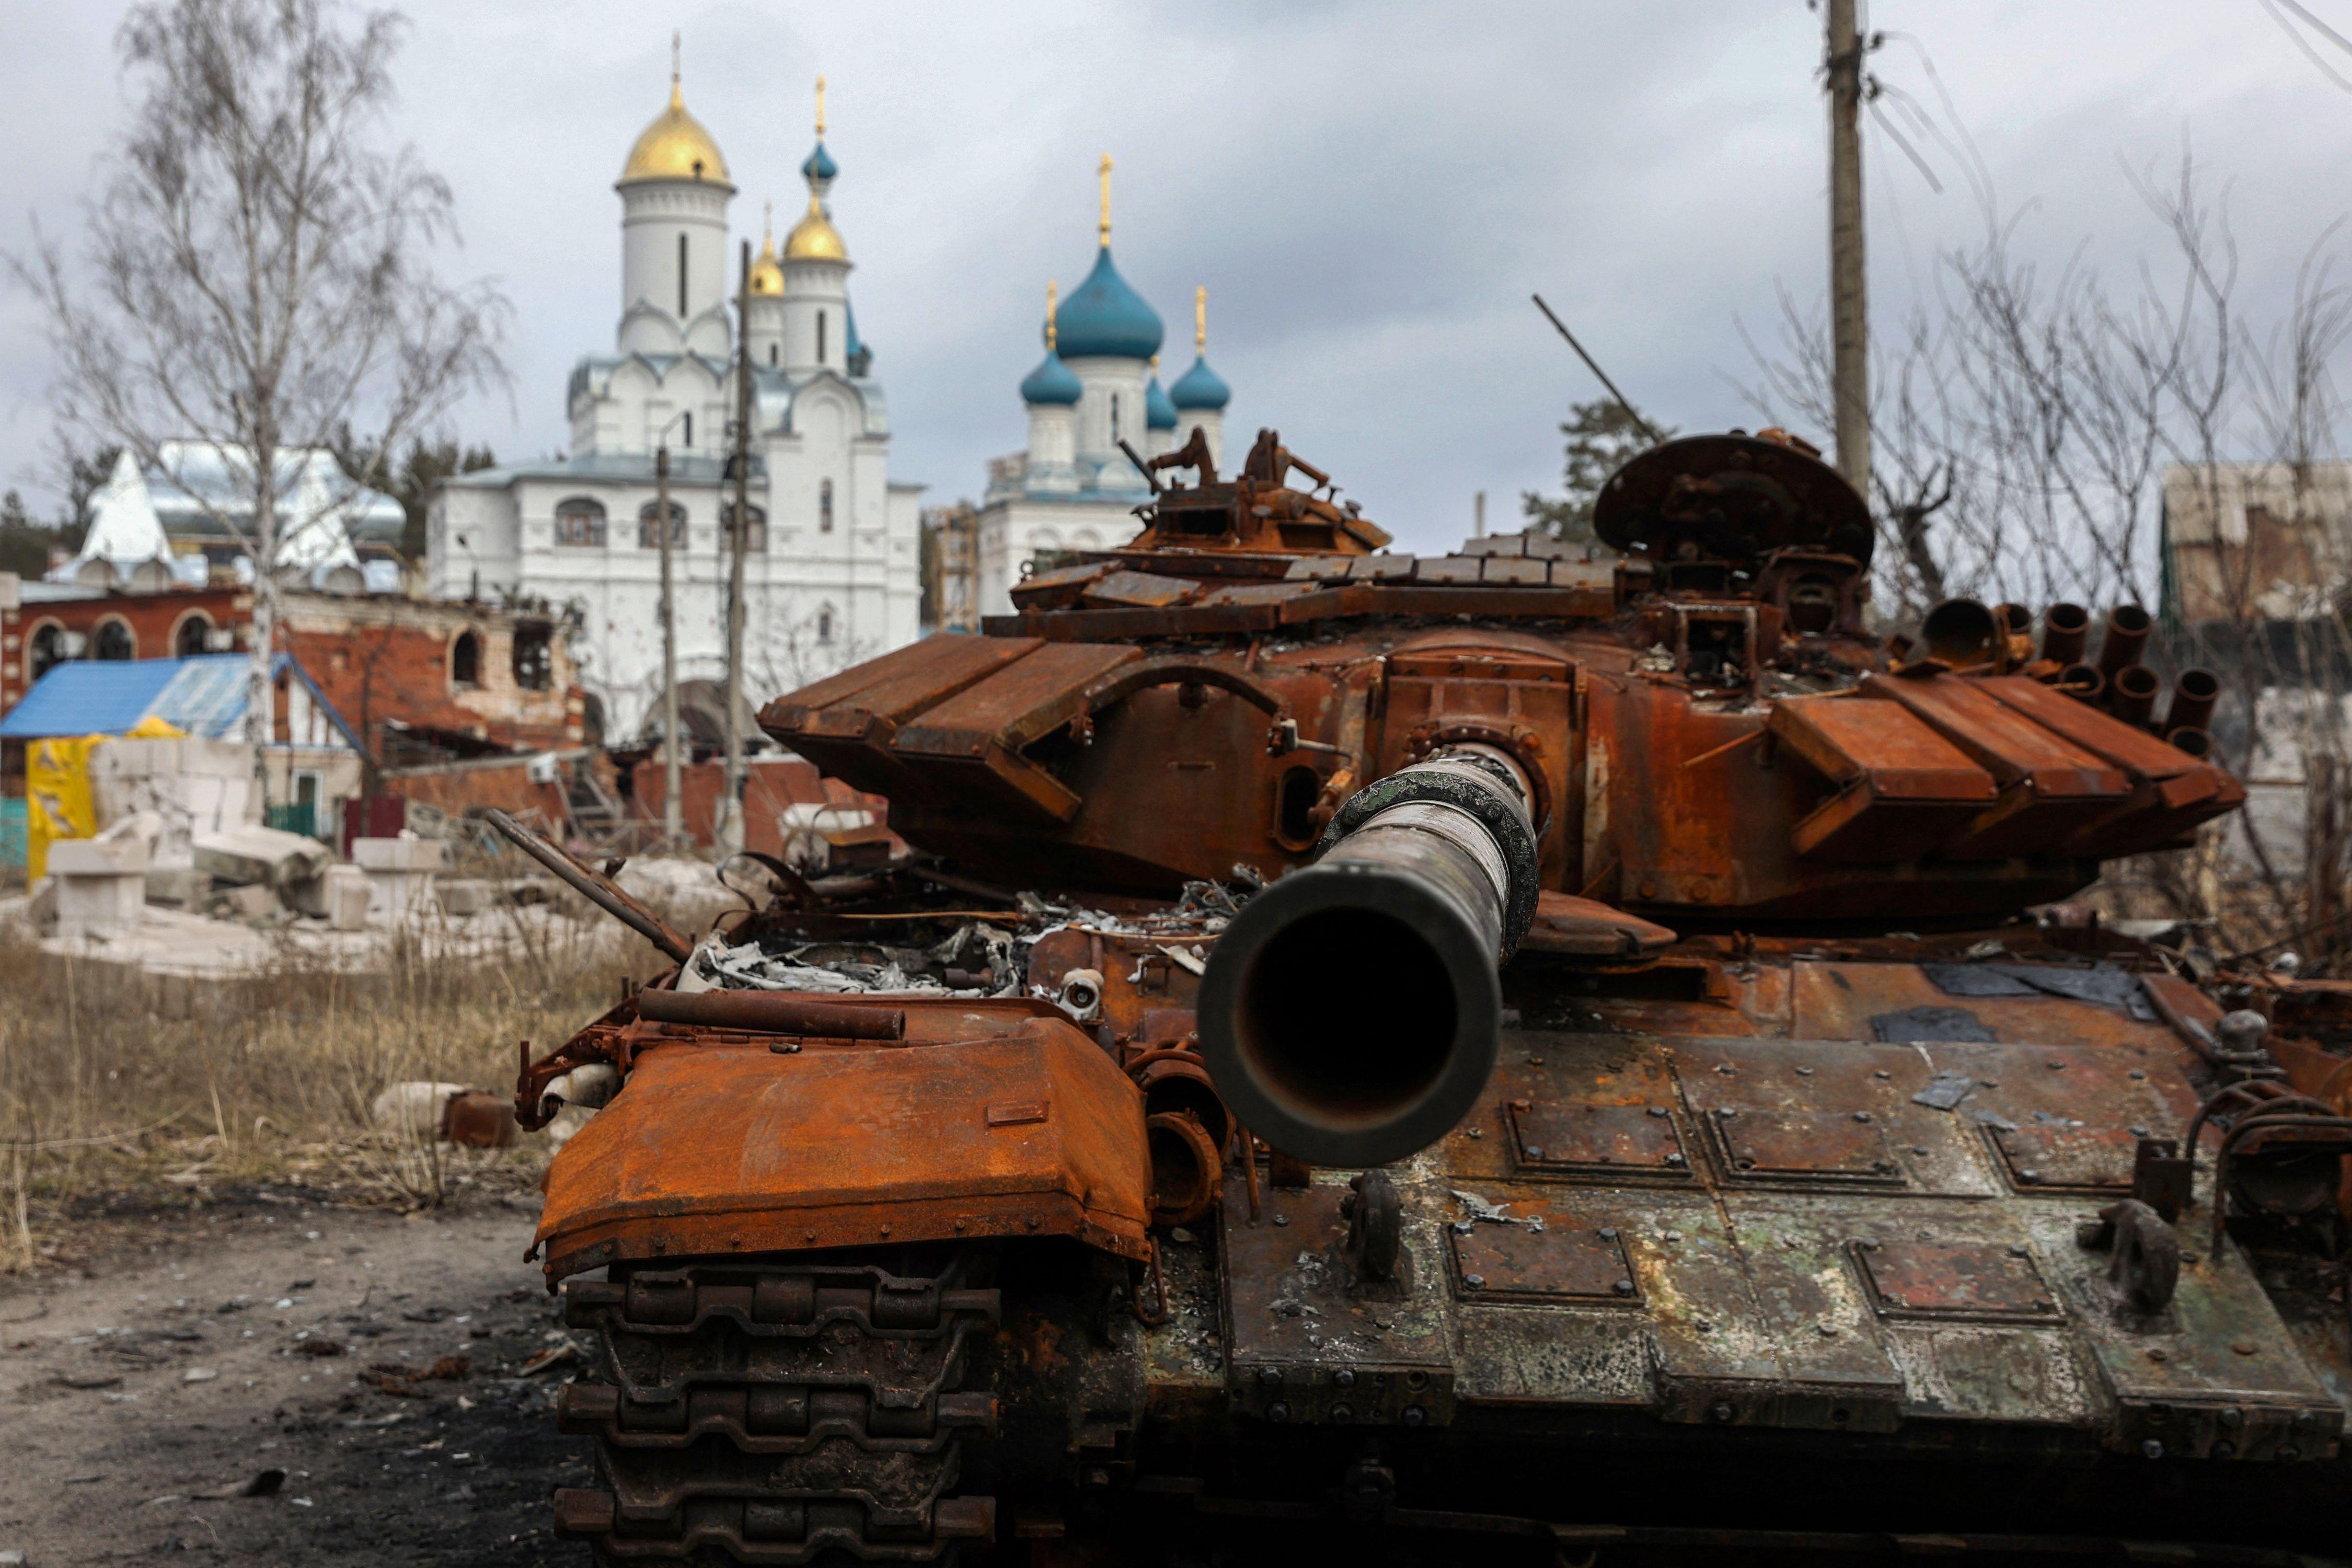 A destroyed Russian tank, rusted orange, sits abandoned. A church can be seen in the background.